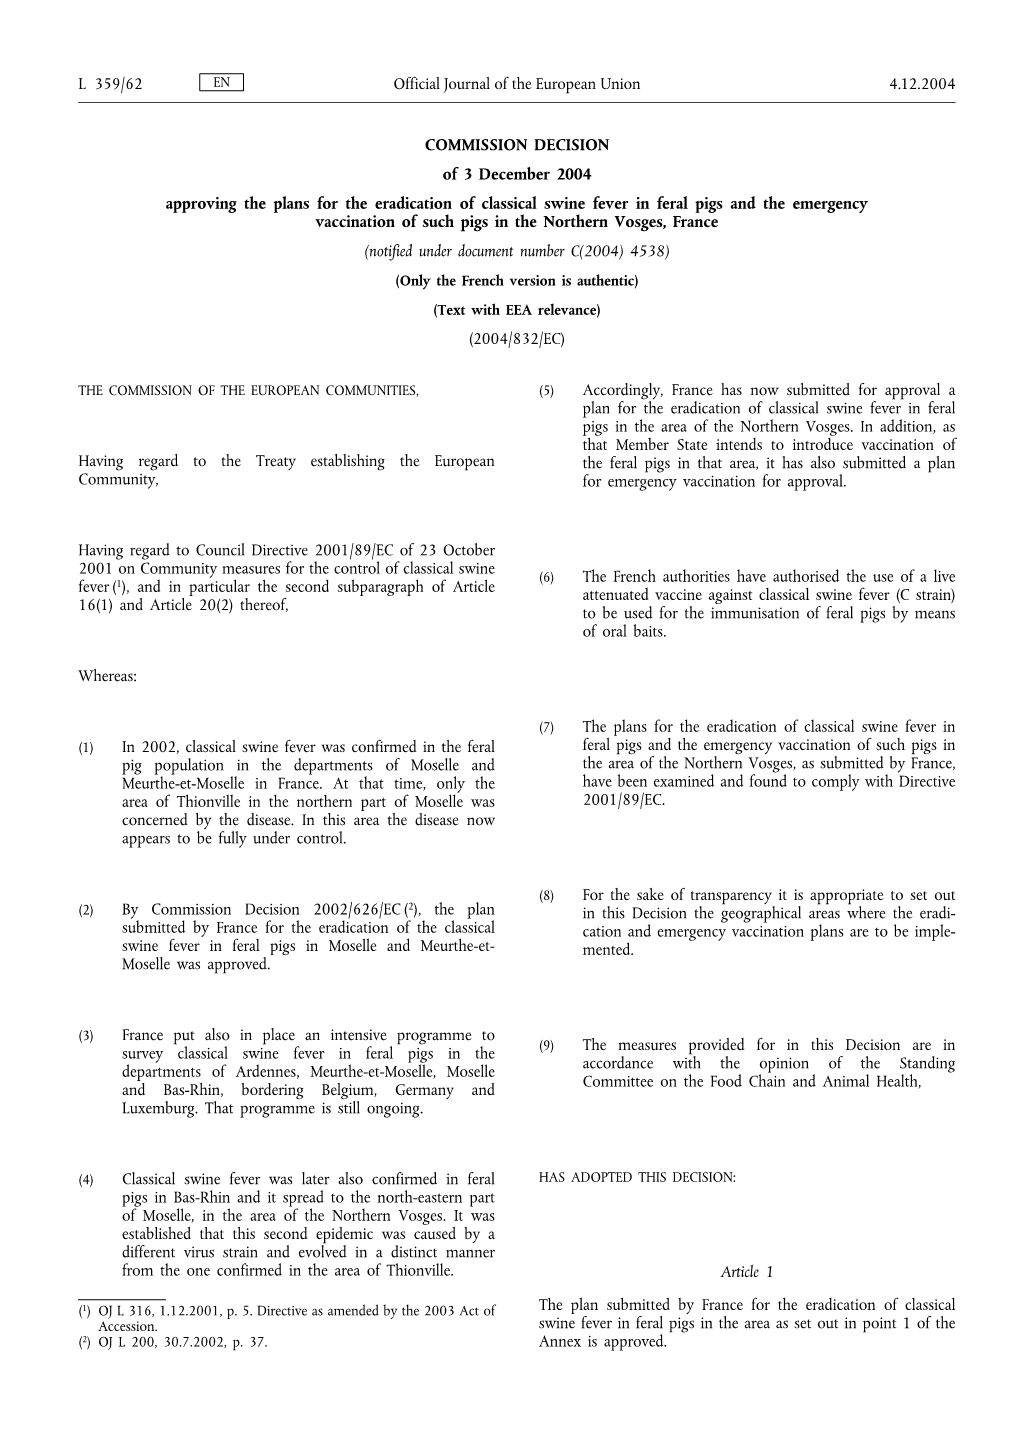 COMMISSION DECISION of 3 December 2004 Approving The